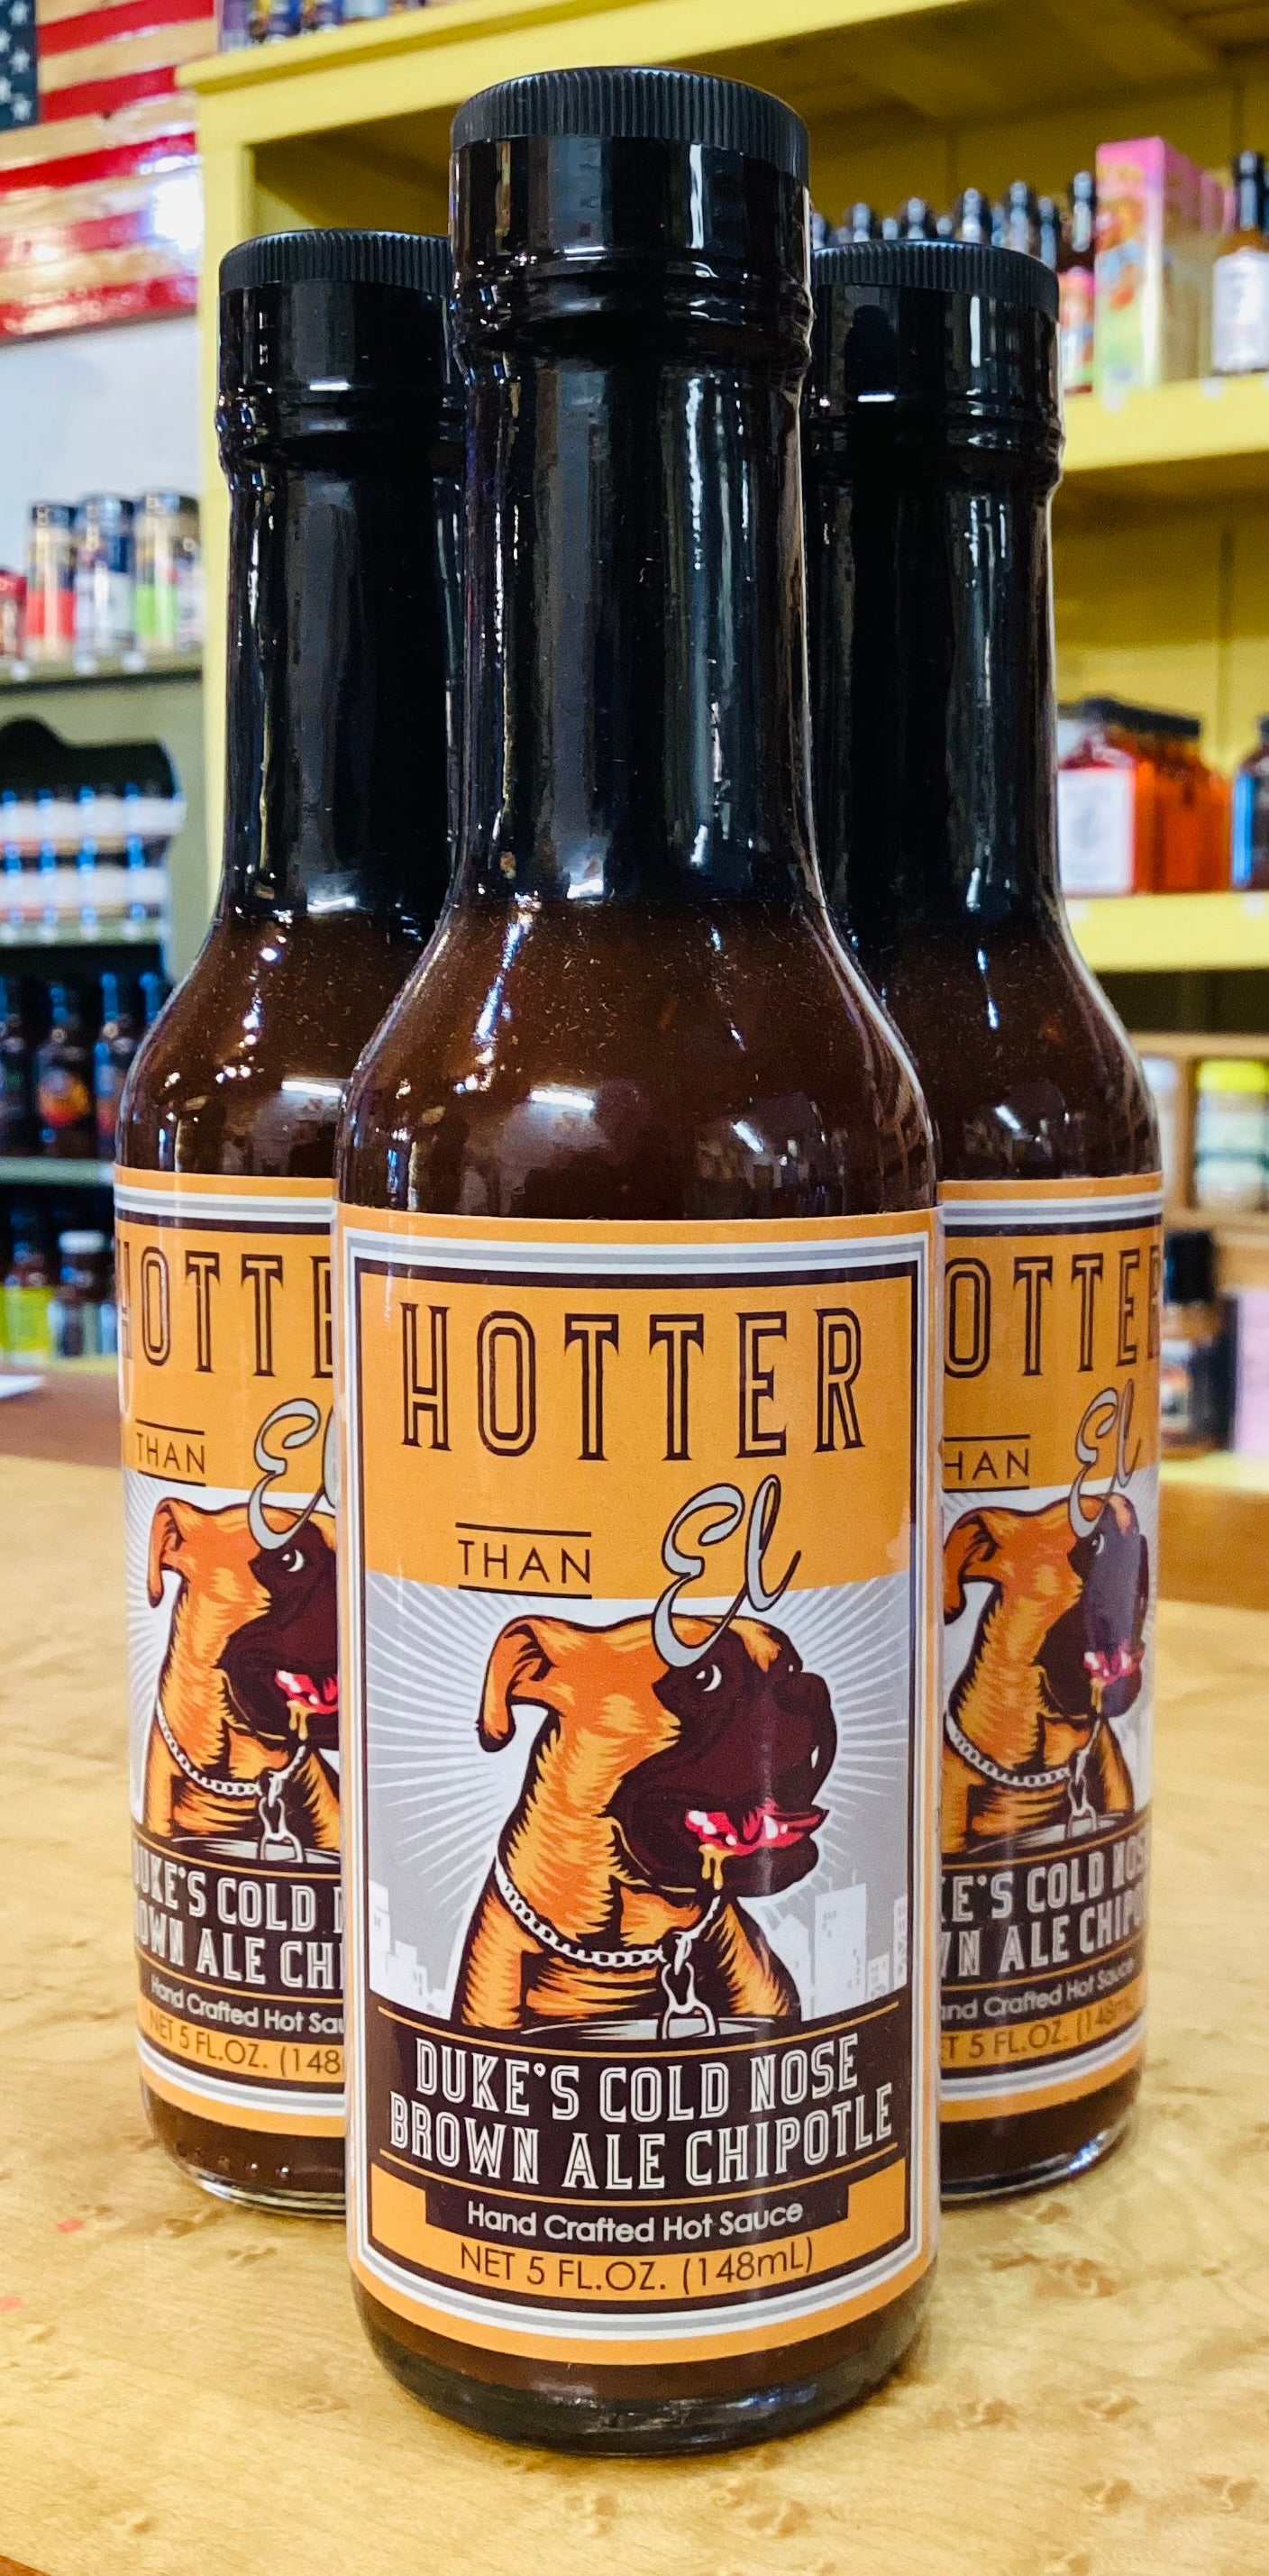 Hotter Than El Duke's Cold Nose Brown Ale Chipotle